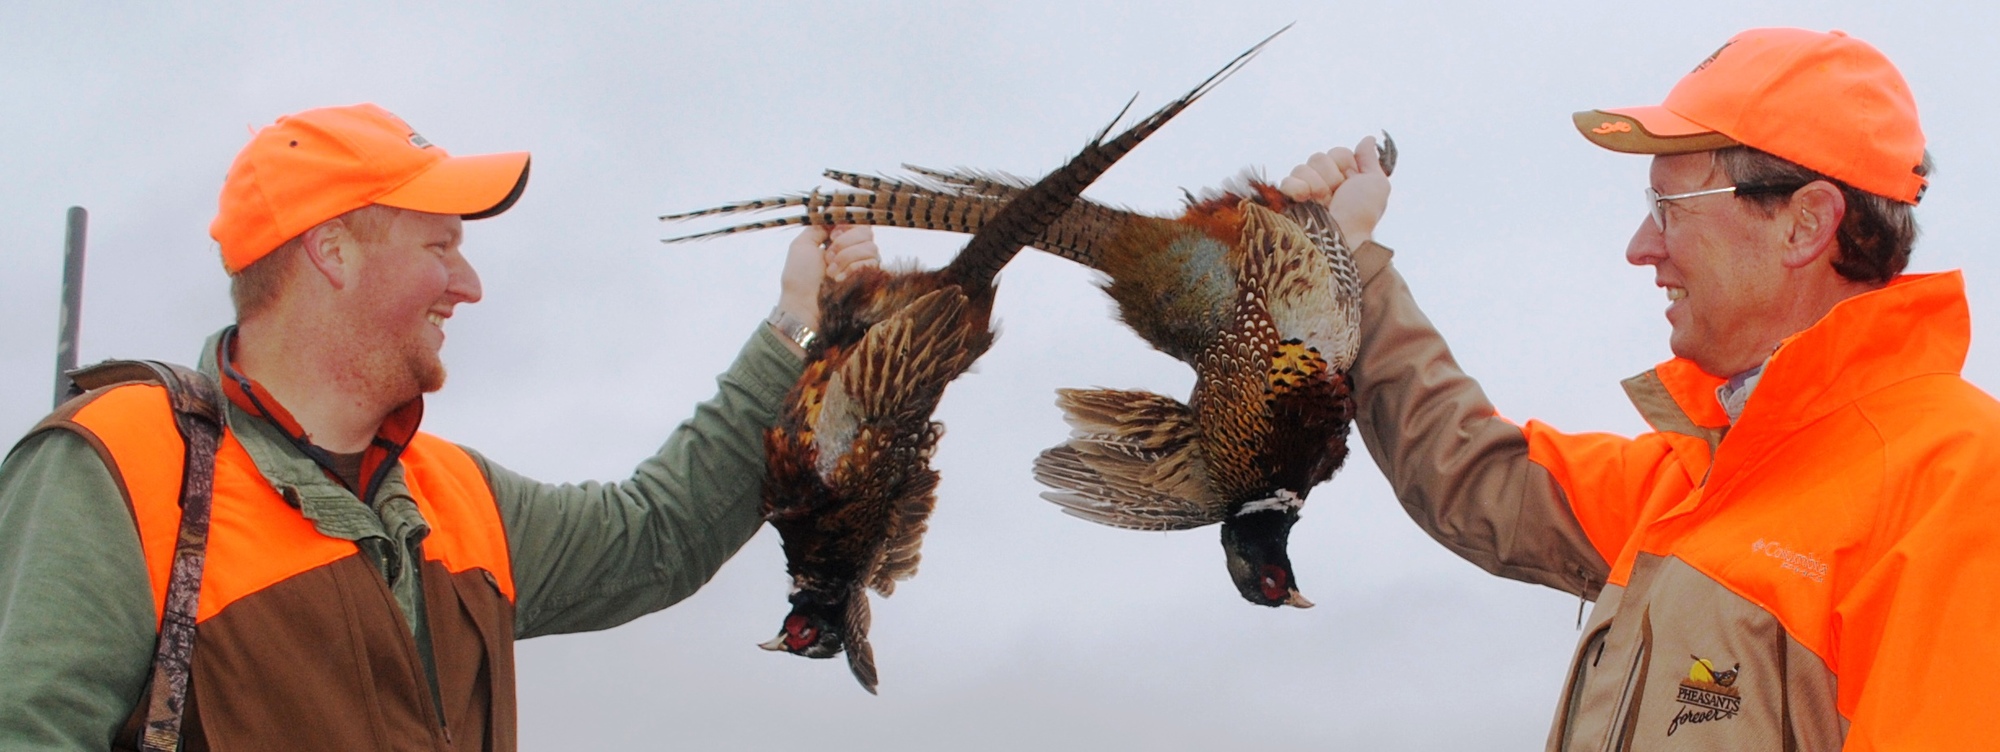 Two hunters dressed in hunter jackets hold one pheasant each they shot in Lower Michigan.